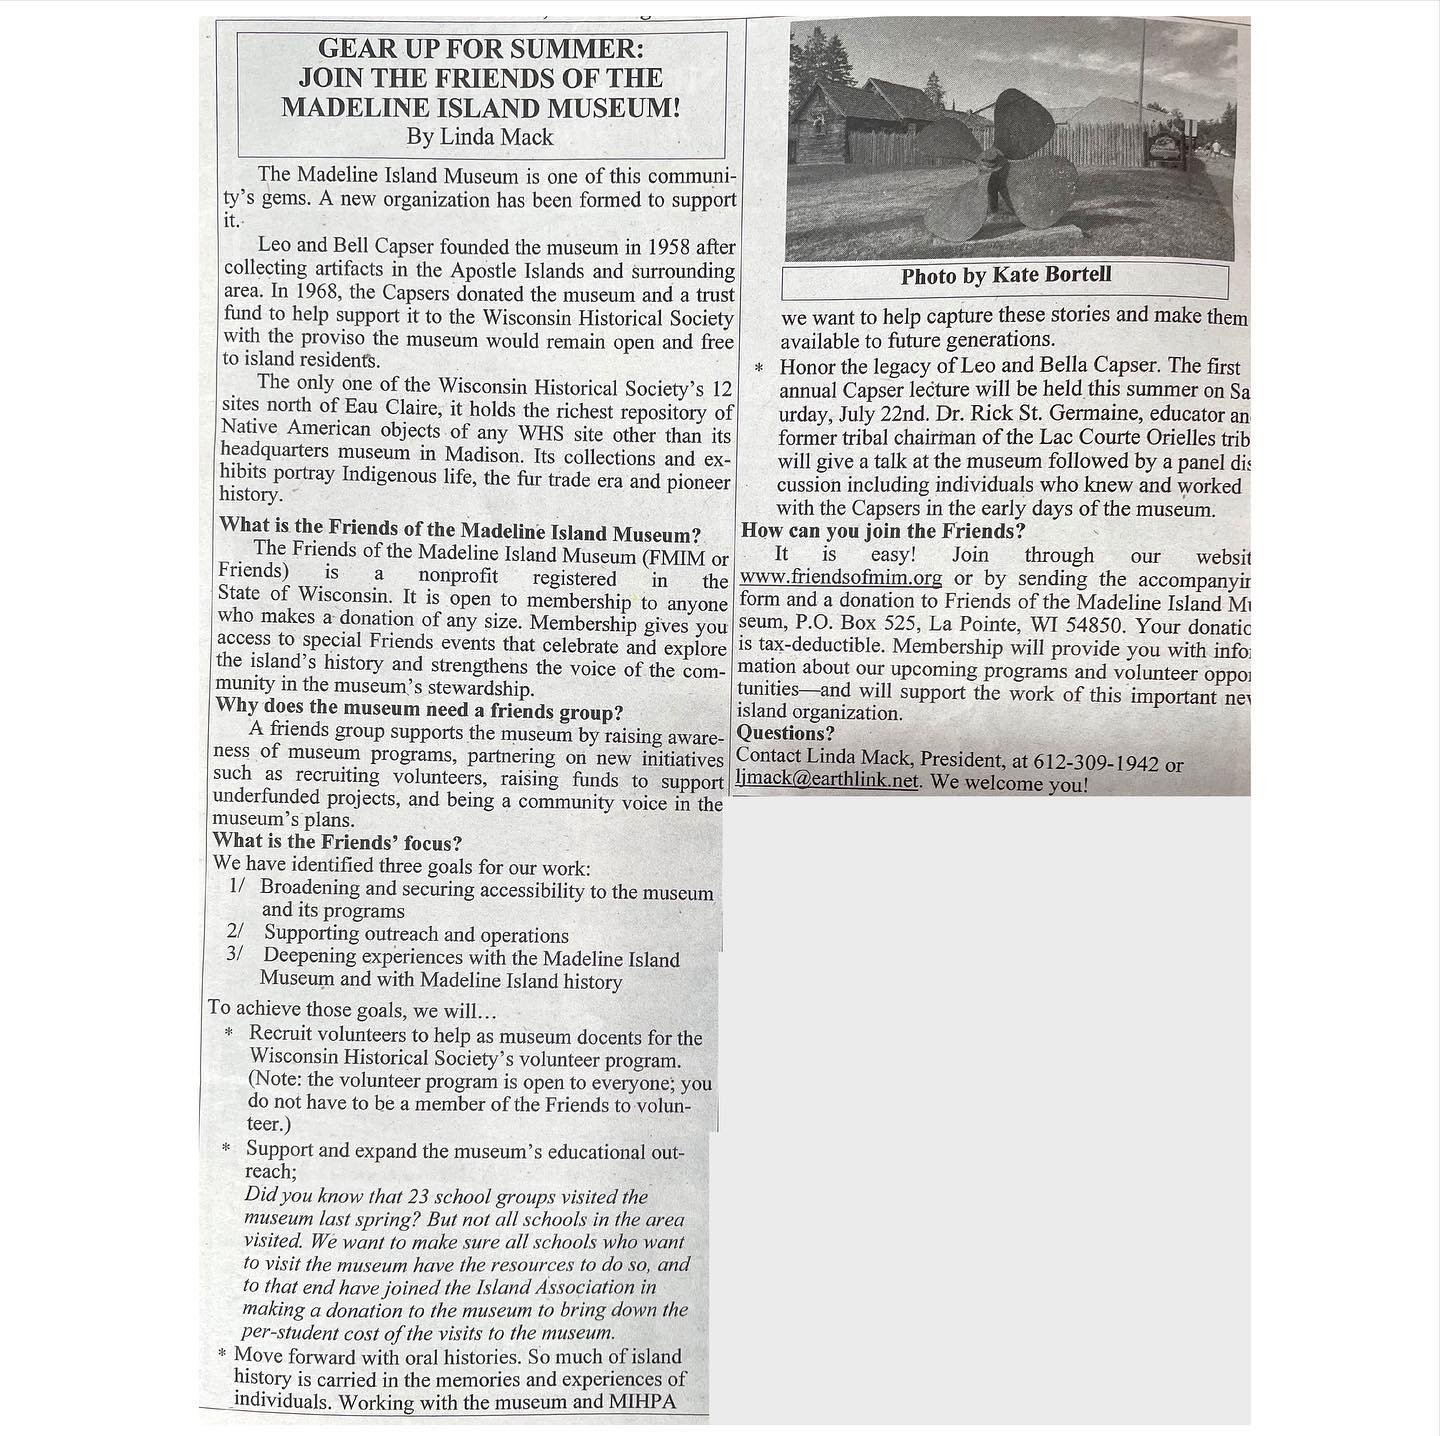 Invitation to join Friends of the Madeline Island Museum as featured in the Gazette.